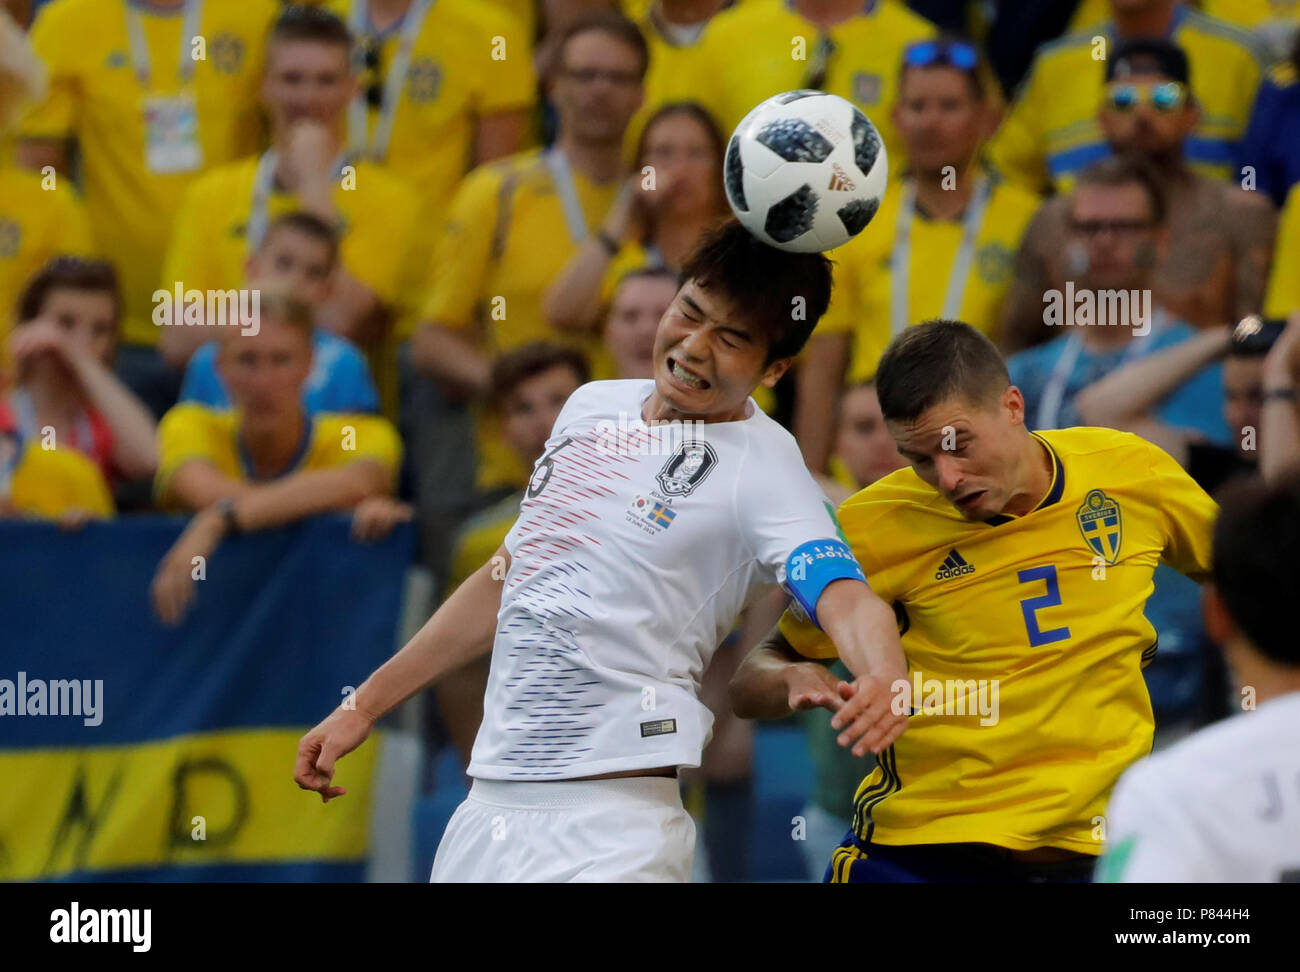 NIZHNY NOVGOROD, RUSSIA - JUNE 18: Mikael Lustig (R) of Sweden national team and Sungyueng Ki of Korea Republic national team vie for the ball during the 2018 FIFA World Cup Russia group F match between Sweden and Korea Republic at Nizhny Novgorod Stadium on June 18, 2018 in Nizhny Novgorod, Russia. Stock Photo